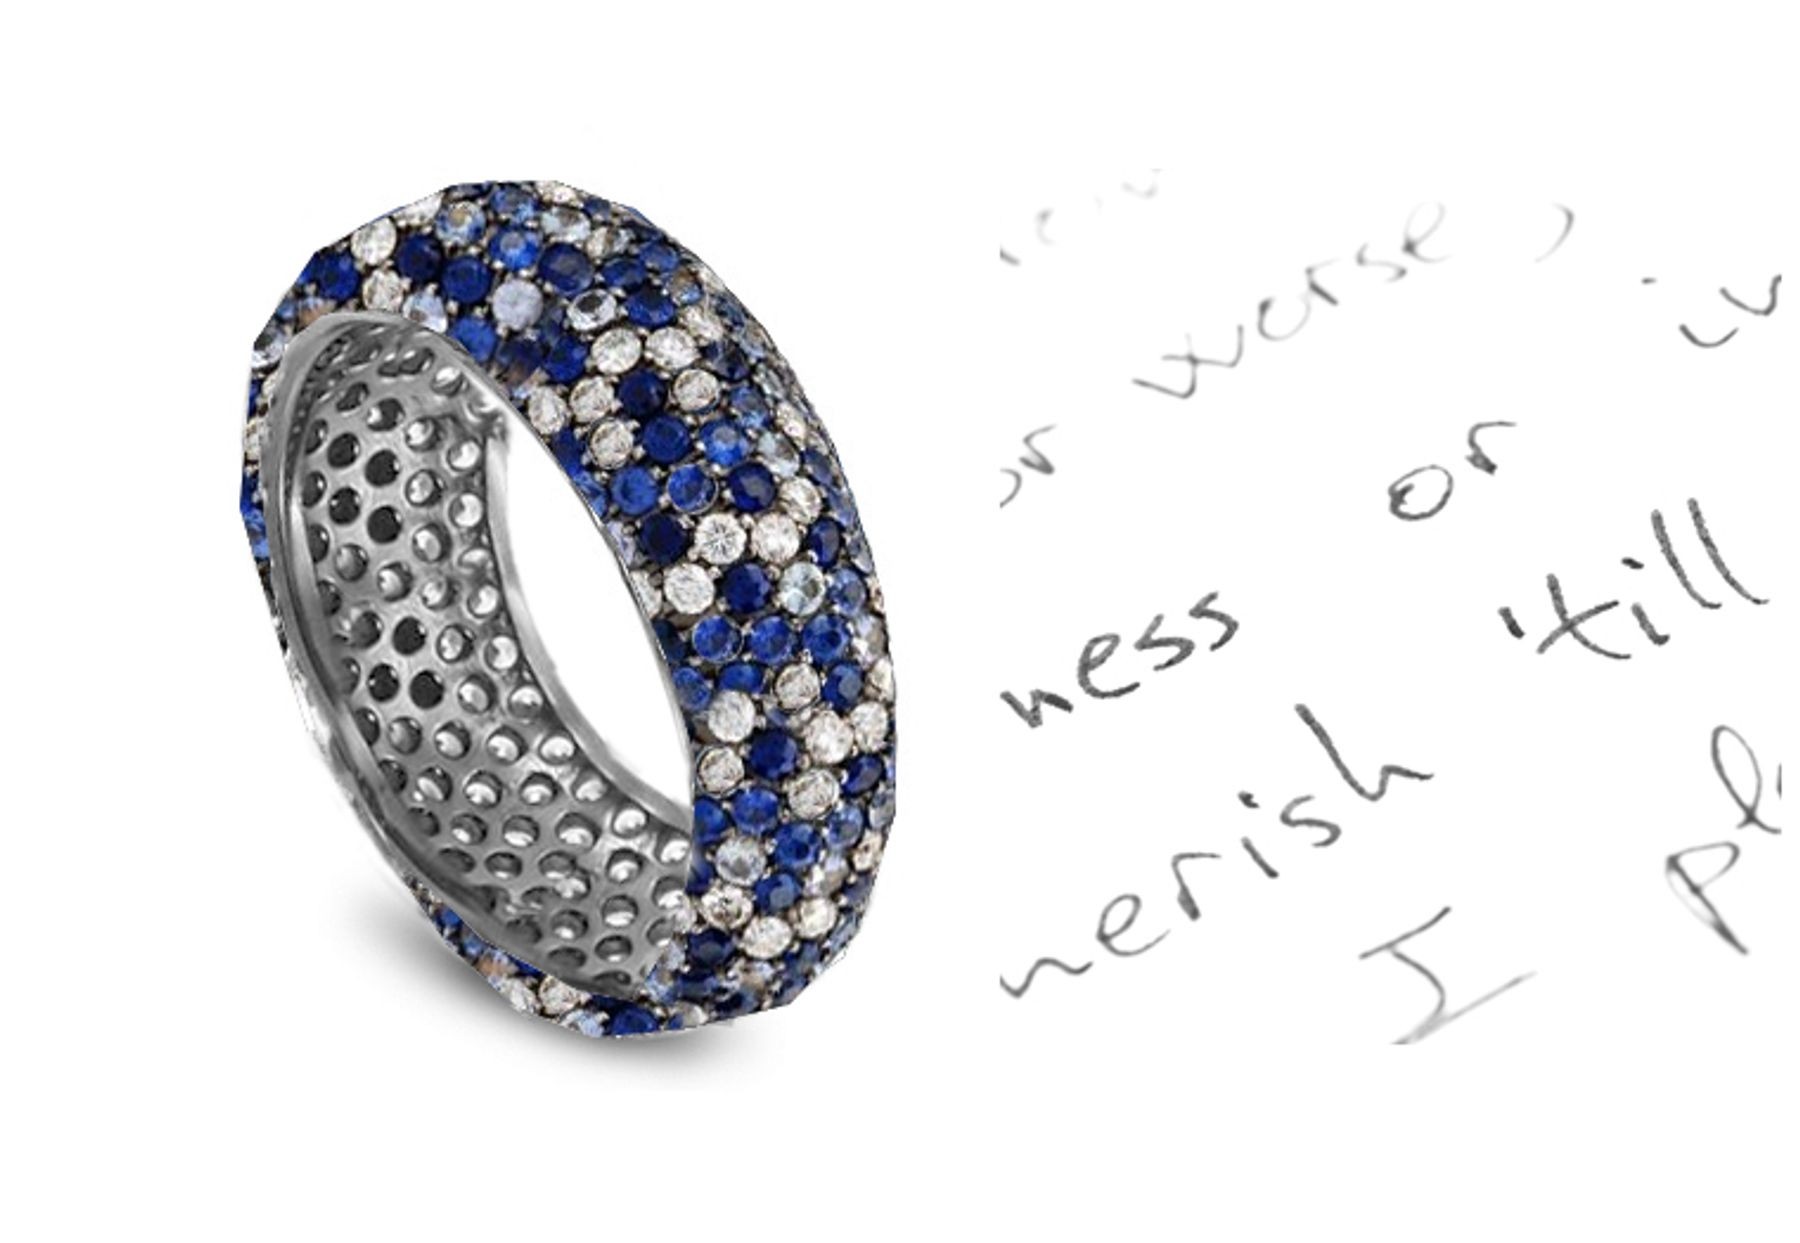 Magnificent: Micropavee Sprinkled Velvety Blue Sapphire & Circular Cut Diamond Eternity Band